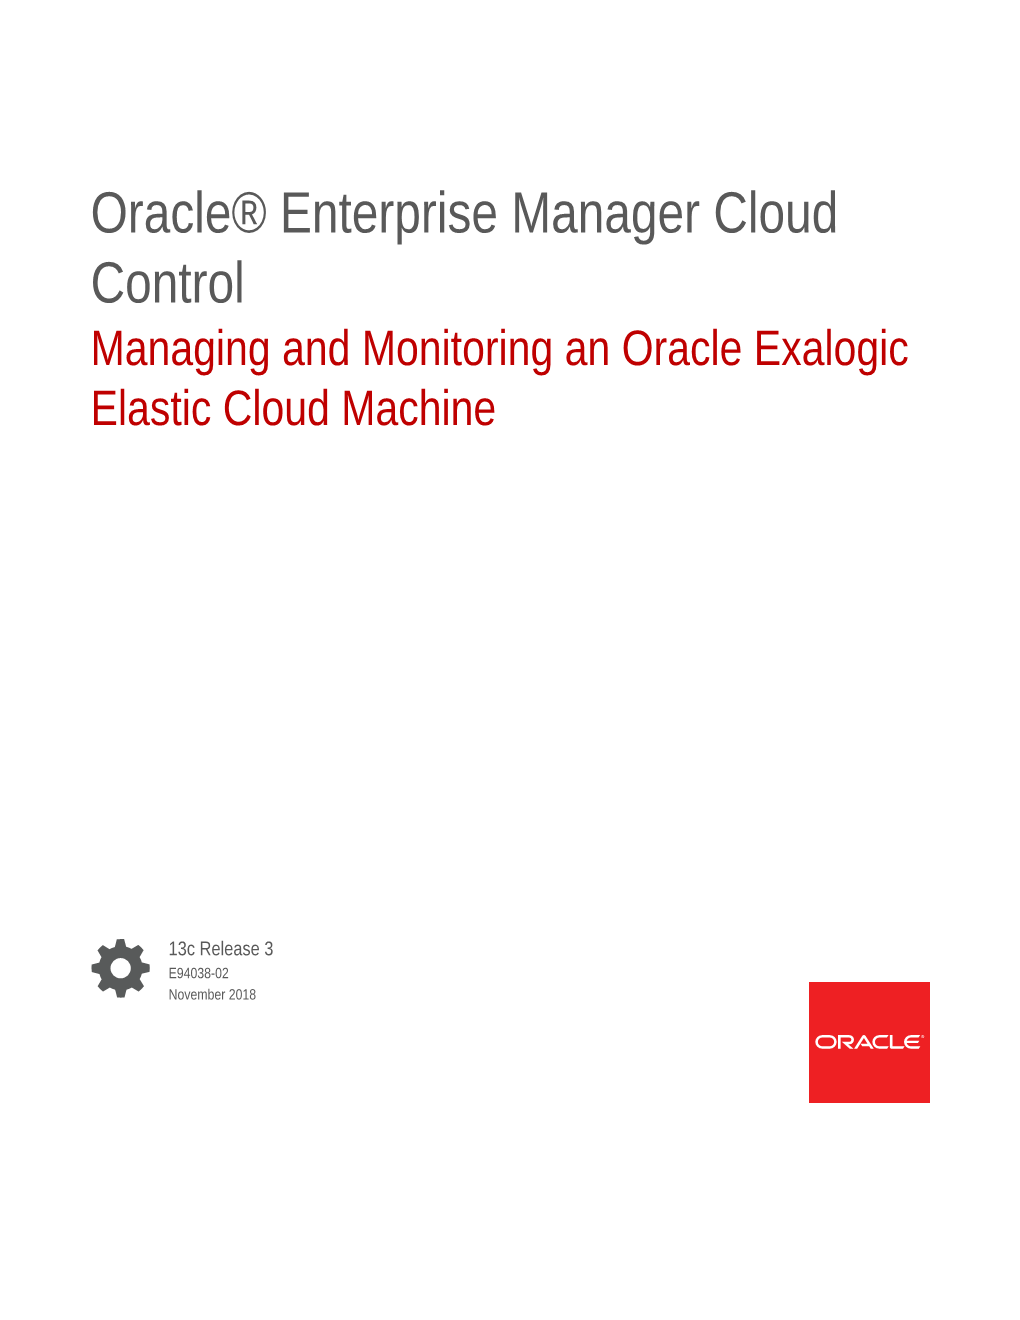 Managing and Monitoring an Oracle Exalogic Elastic Cloud Machine